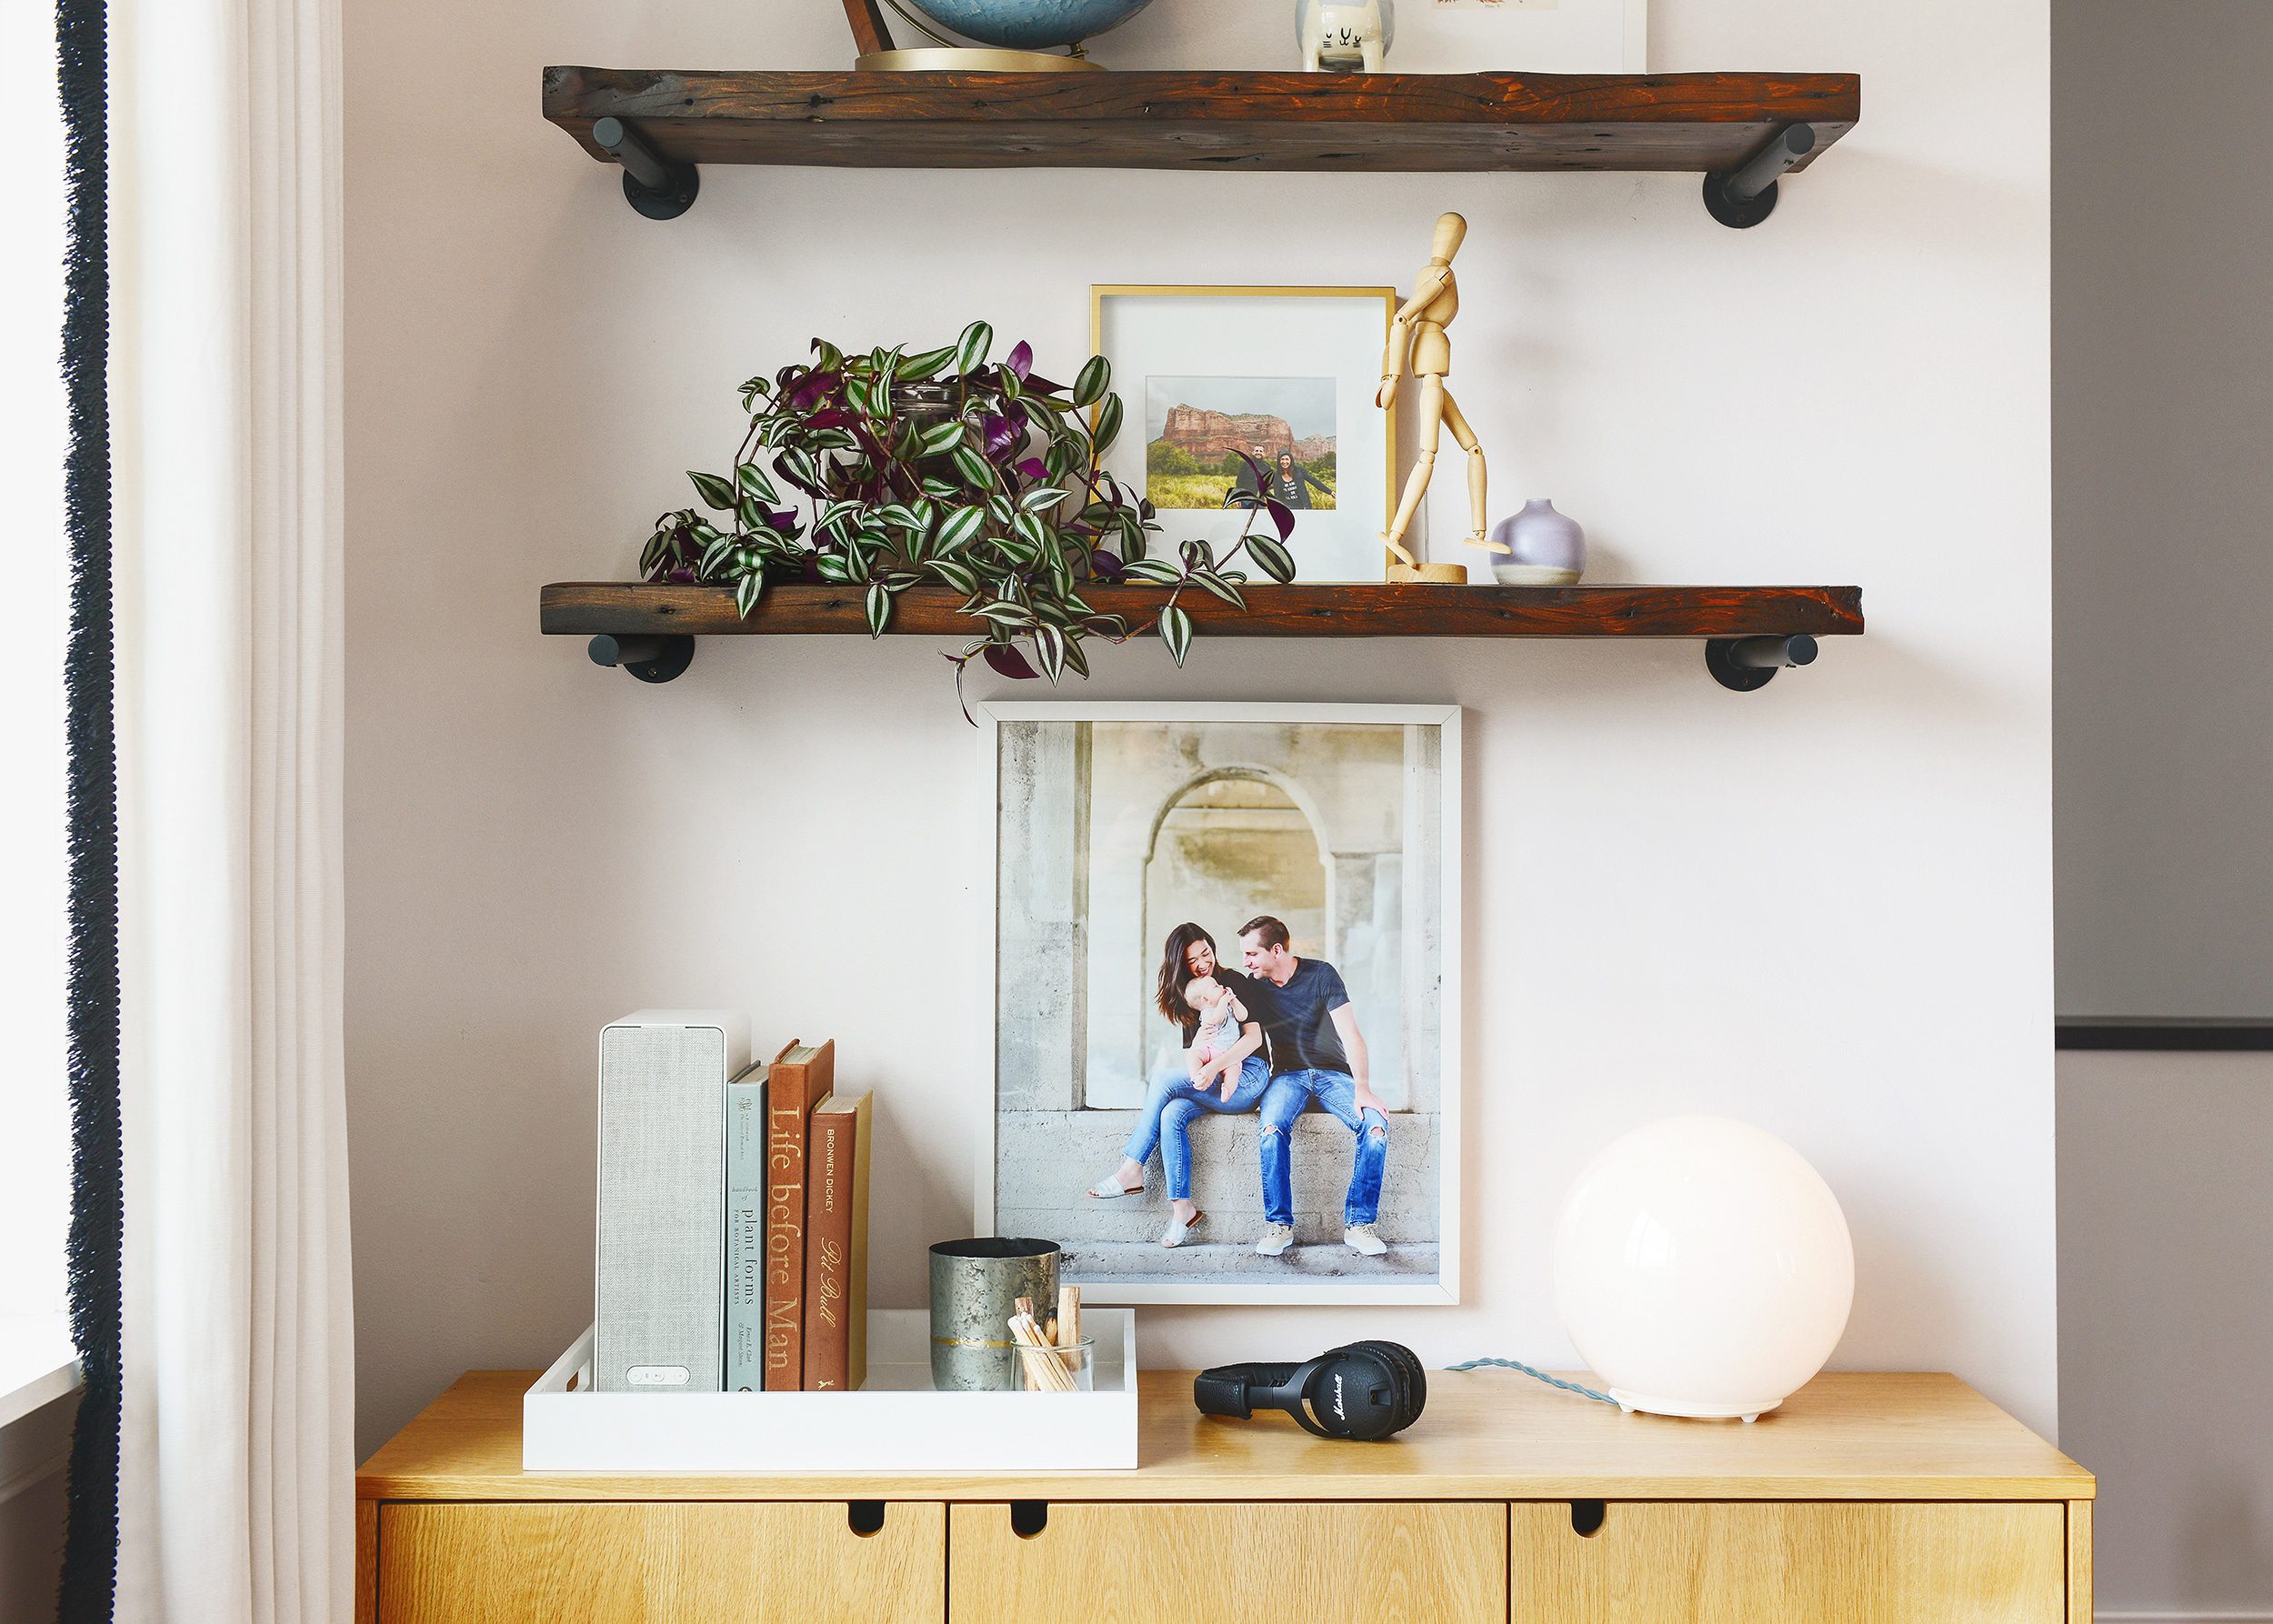 The top of an oak credenza holds a tray full of books, candles, headphones. Above it, vintage shelves hold plants and decor items // via Yellow Brick Home